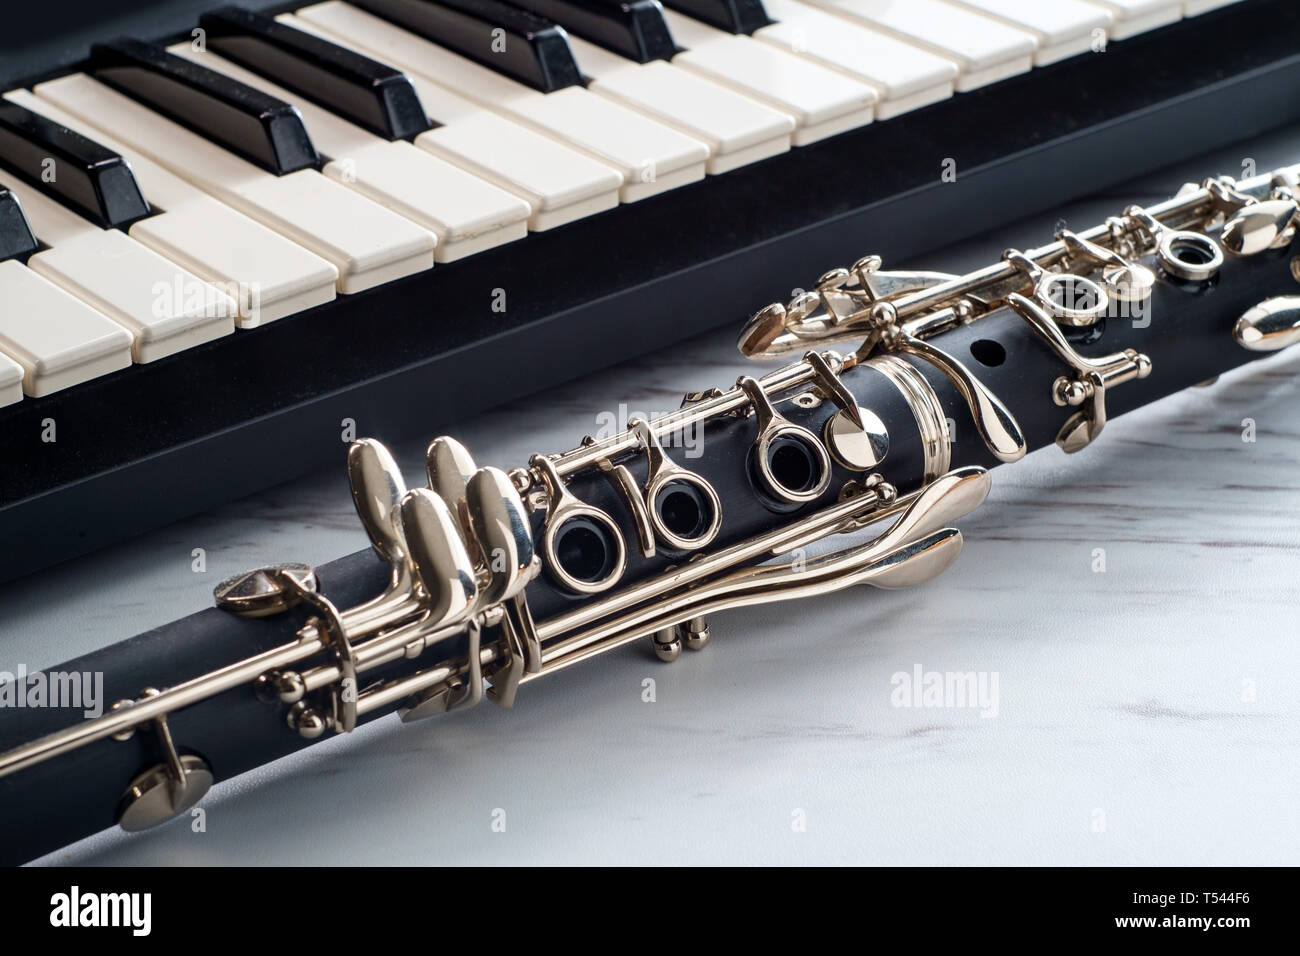 Rusty old classical clarinet on marble table next to electric piano  keyboard Stock Photo - Alamy